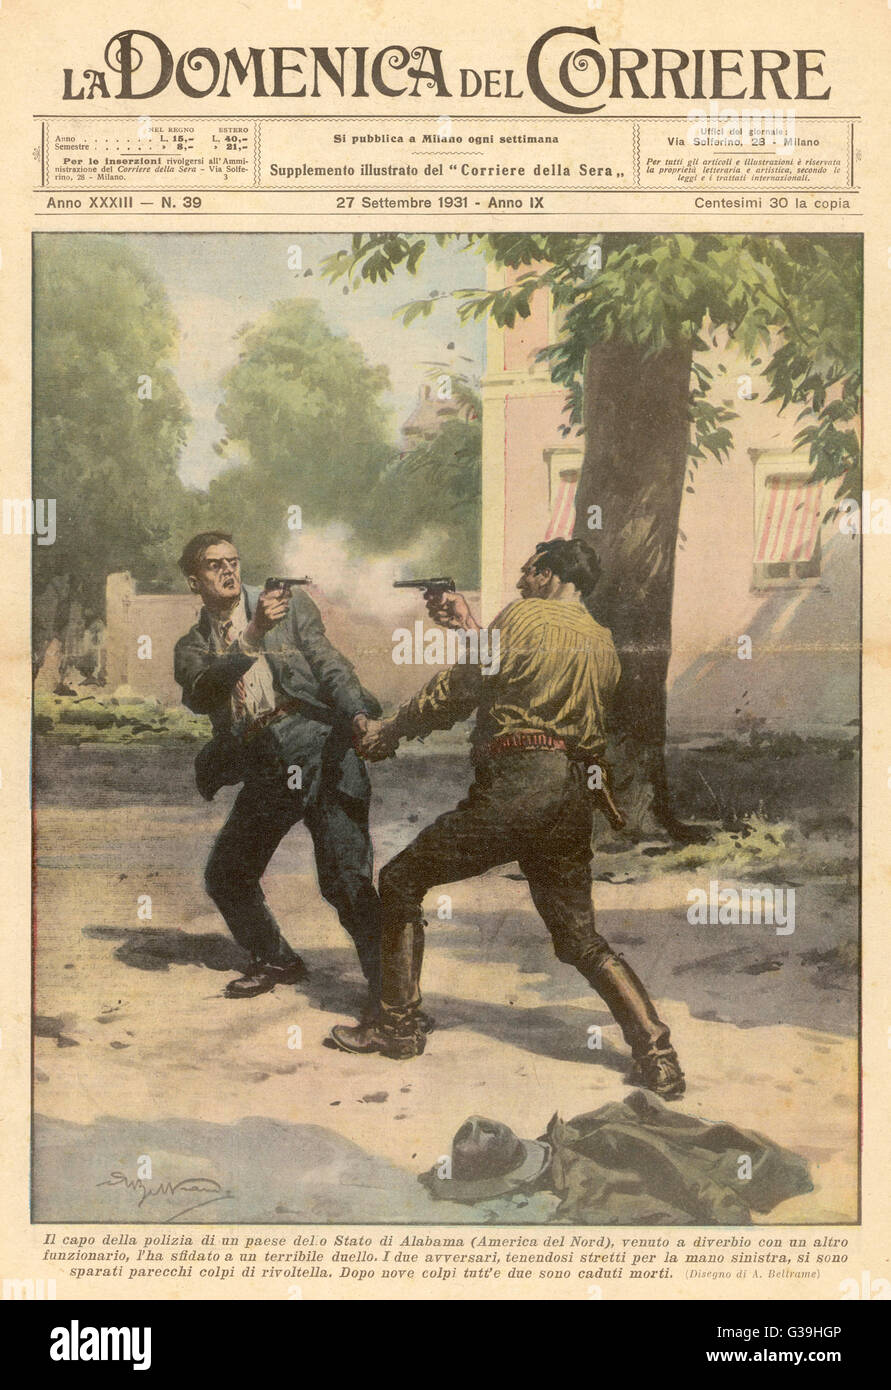 The police chief of an  Alabama town fights a duel  with a colleague, tied to each  other by the wrist : not  surprisingly at that distance,  each kills the other     Date: 1931 Stock Photo